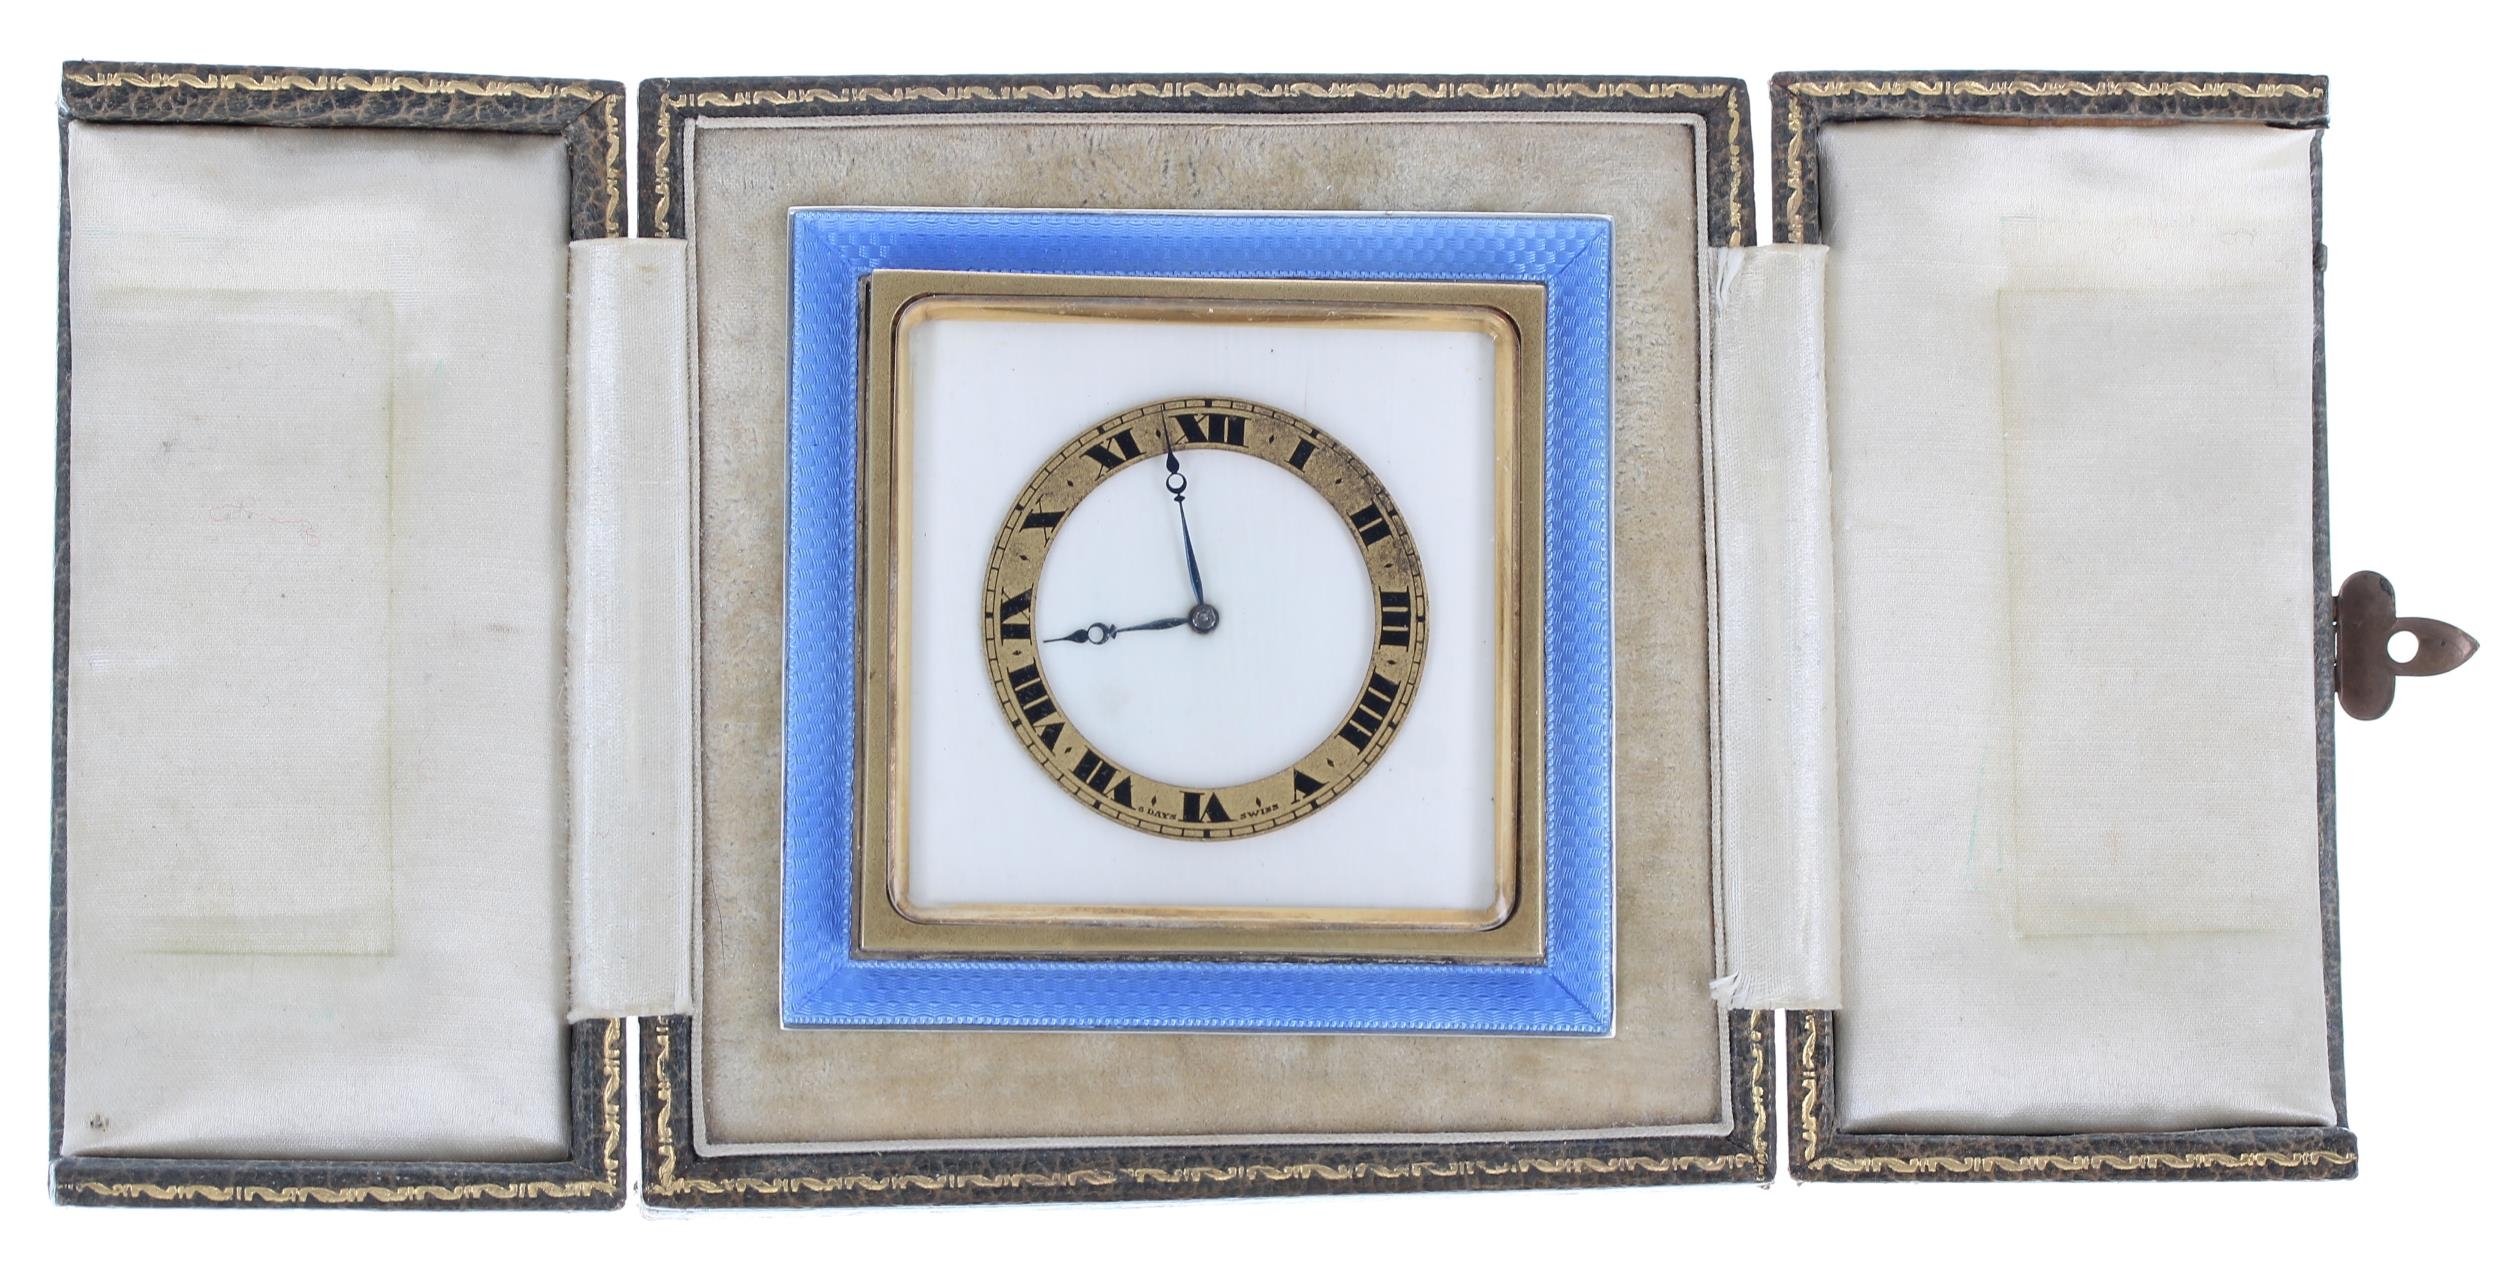 Art Deco silver and blue guilloche enamel travel clock, Birmingham 1925, with a Swiss 8 days